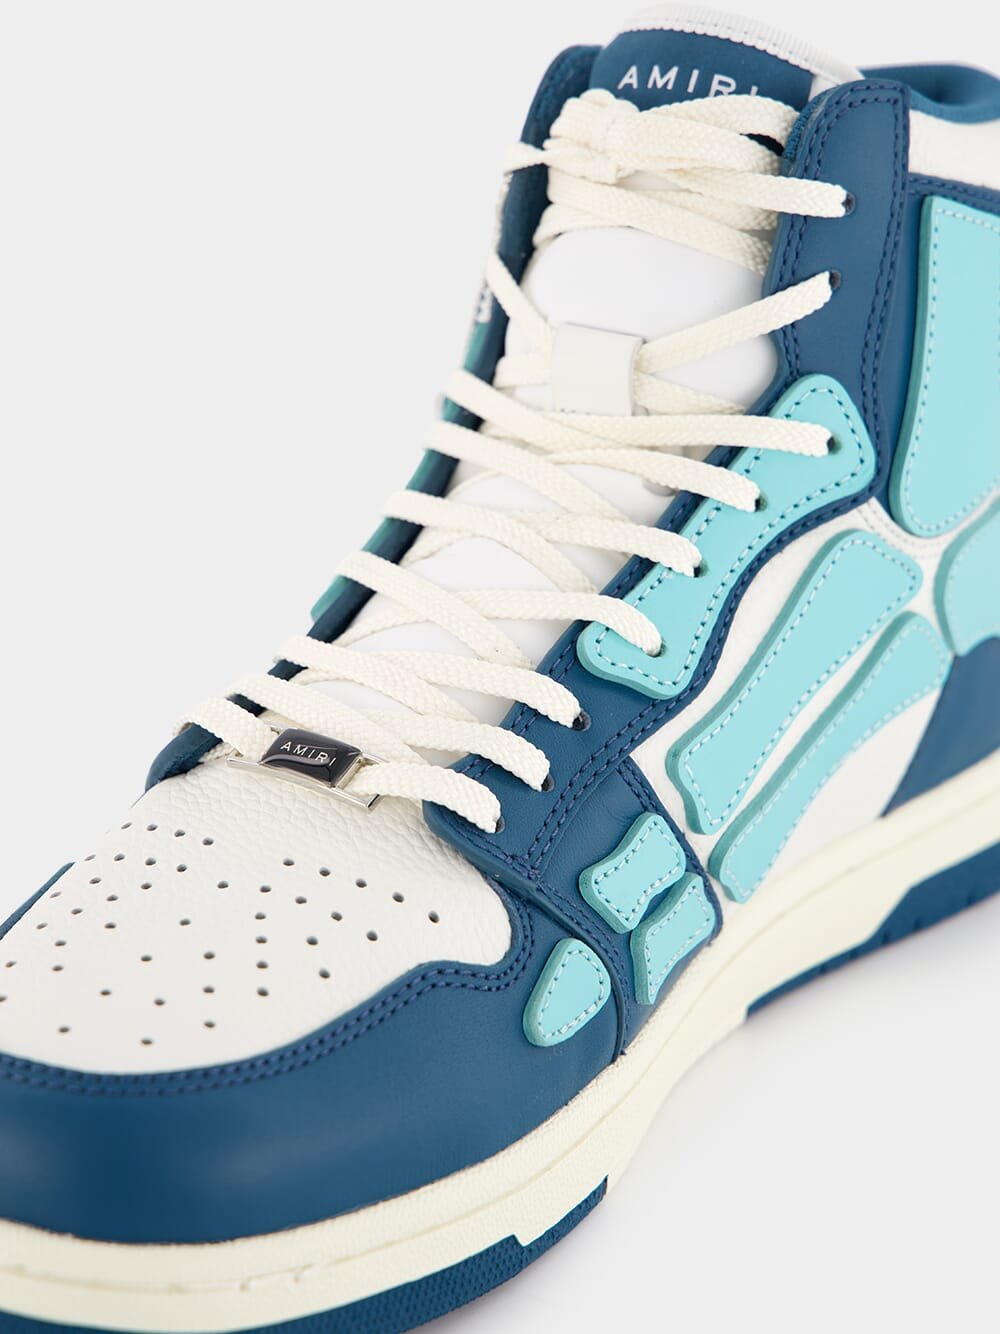 AmiriSkel High-Top Leather Sneakers at Fashion Clinic